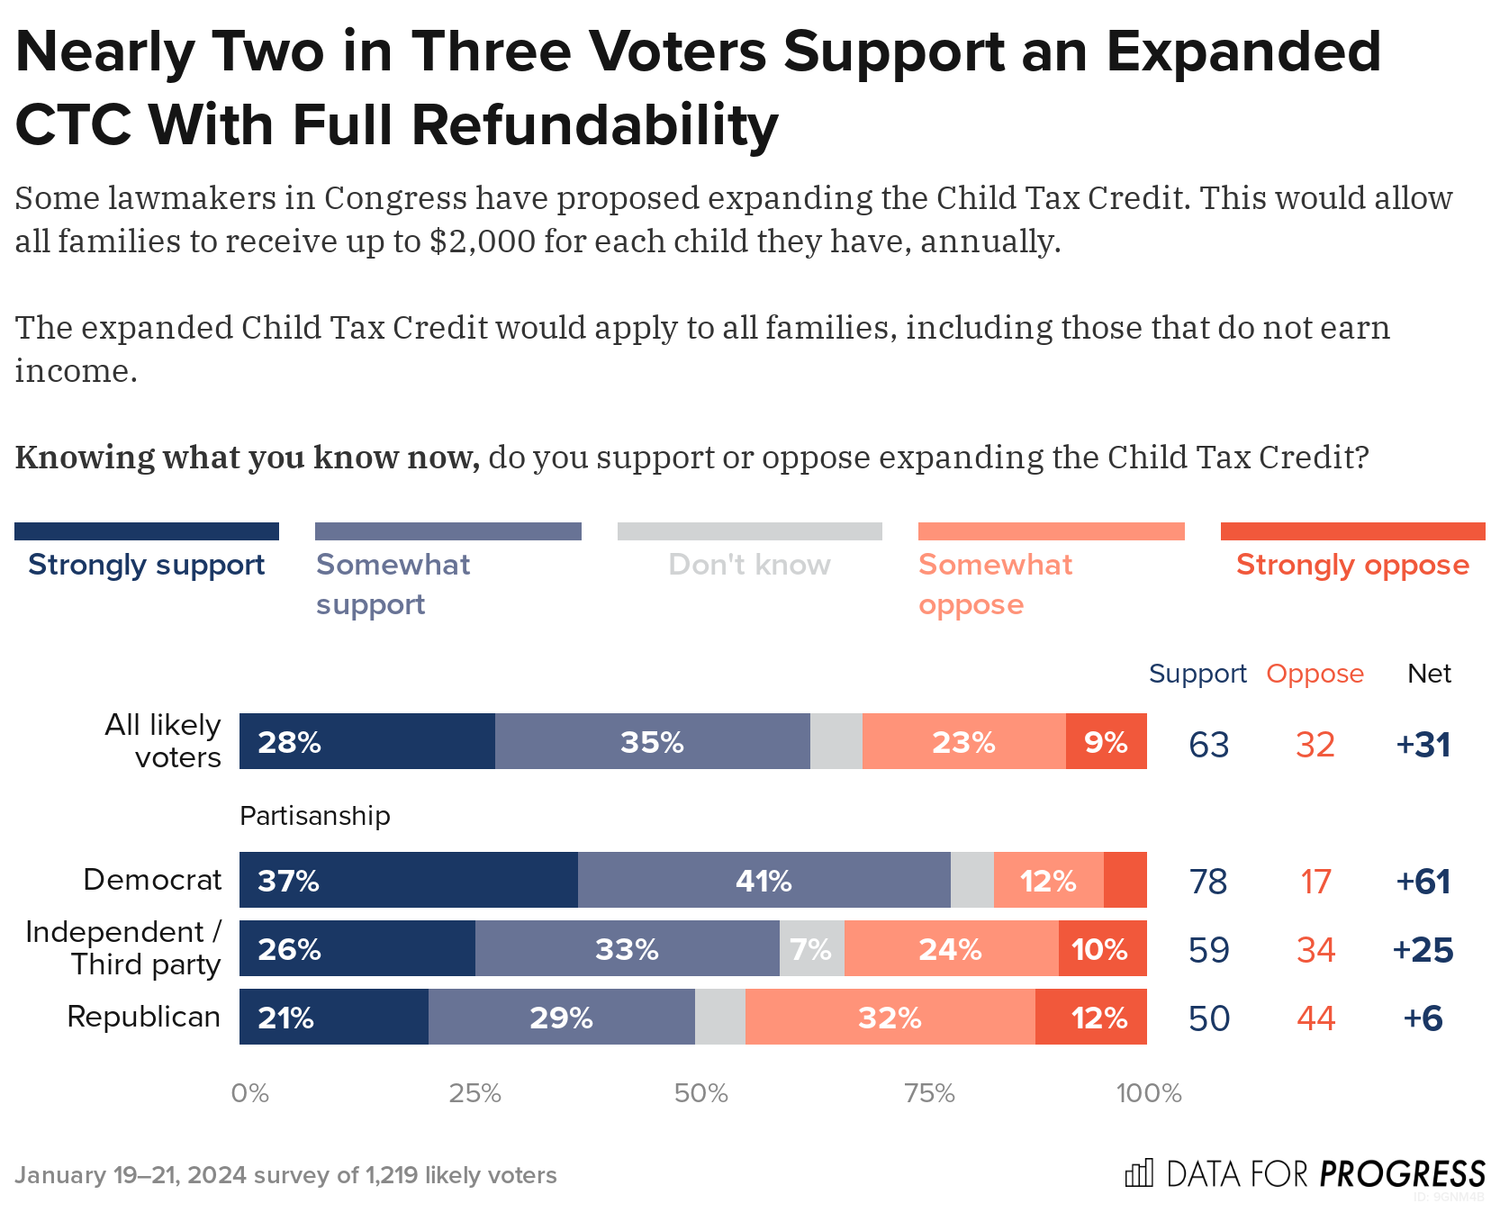 Nearly two in three voters support an expanded CTC wth full refundability